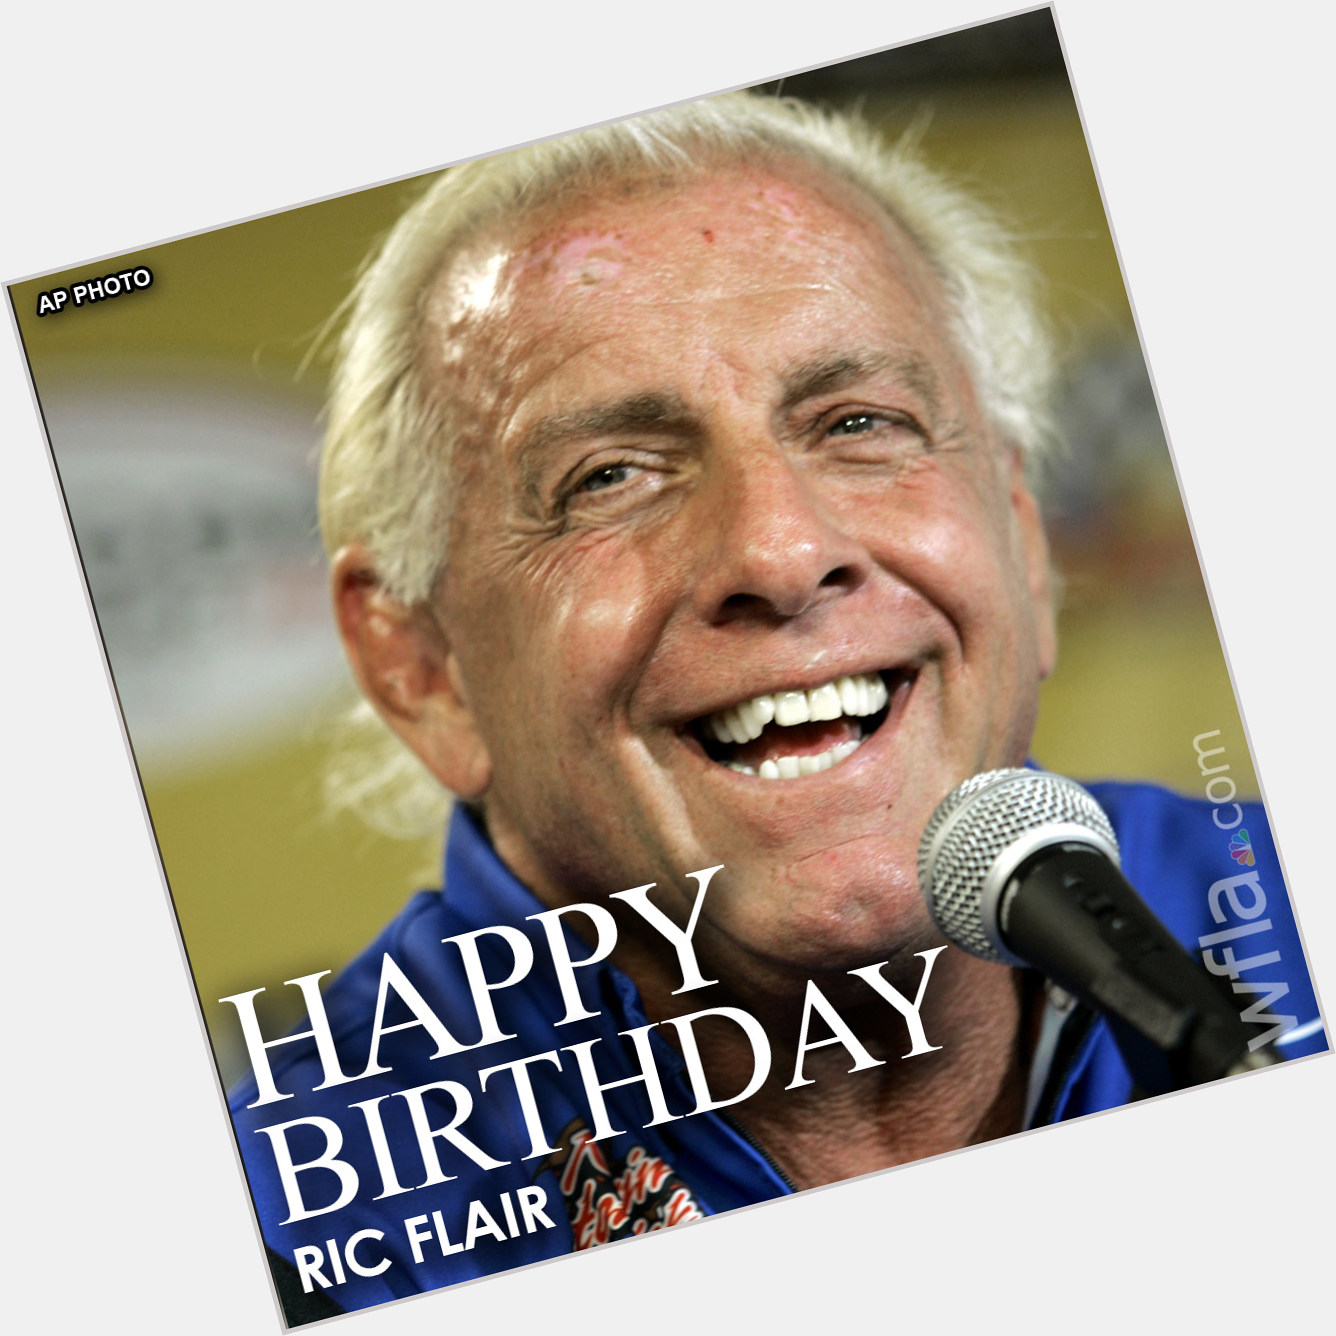 HAPPY BIRTHDAY RIC FLAIR! The WWE Hall of Famer is celebrating his 74th birthday today.  